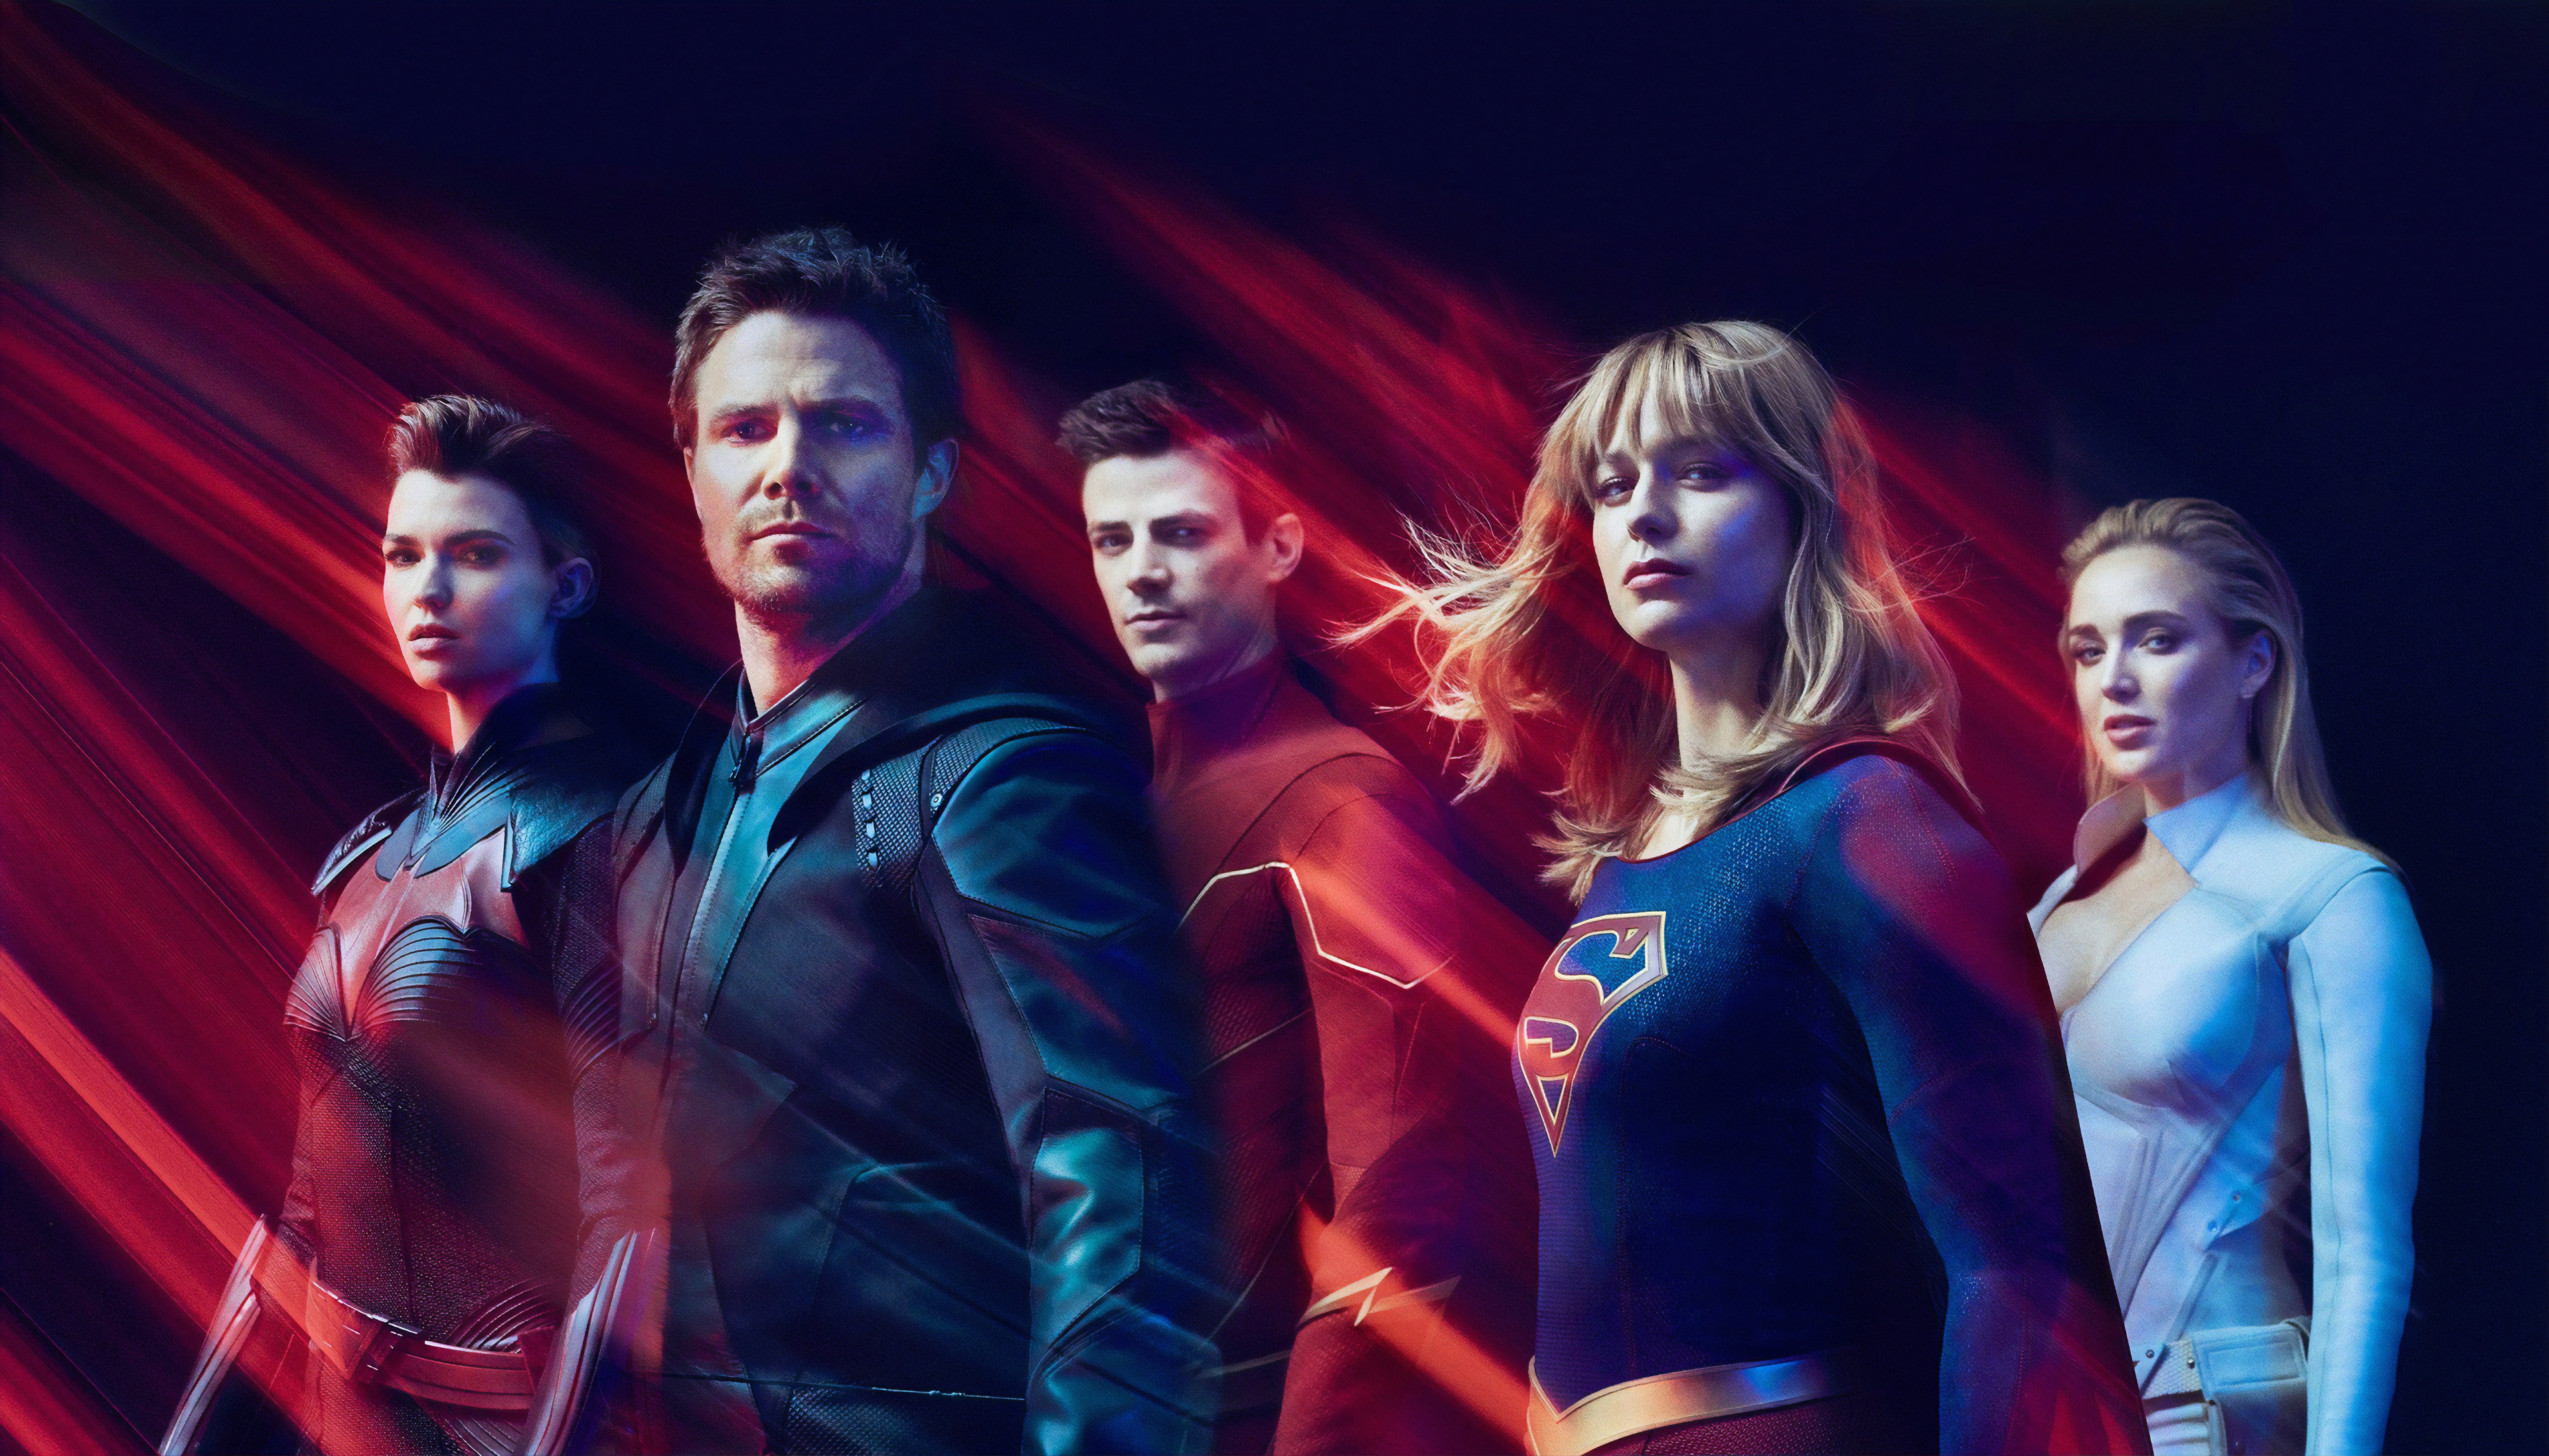 tv show, crossover, actor, actress, arrow (dc comics), batwoman, caity lotz, flash, grant gustin, melissa benoist, ruby rose, stephen amell, supergirl, white canary (dc comics)